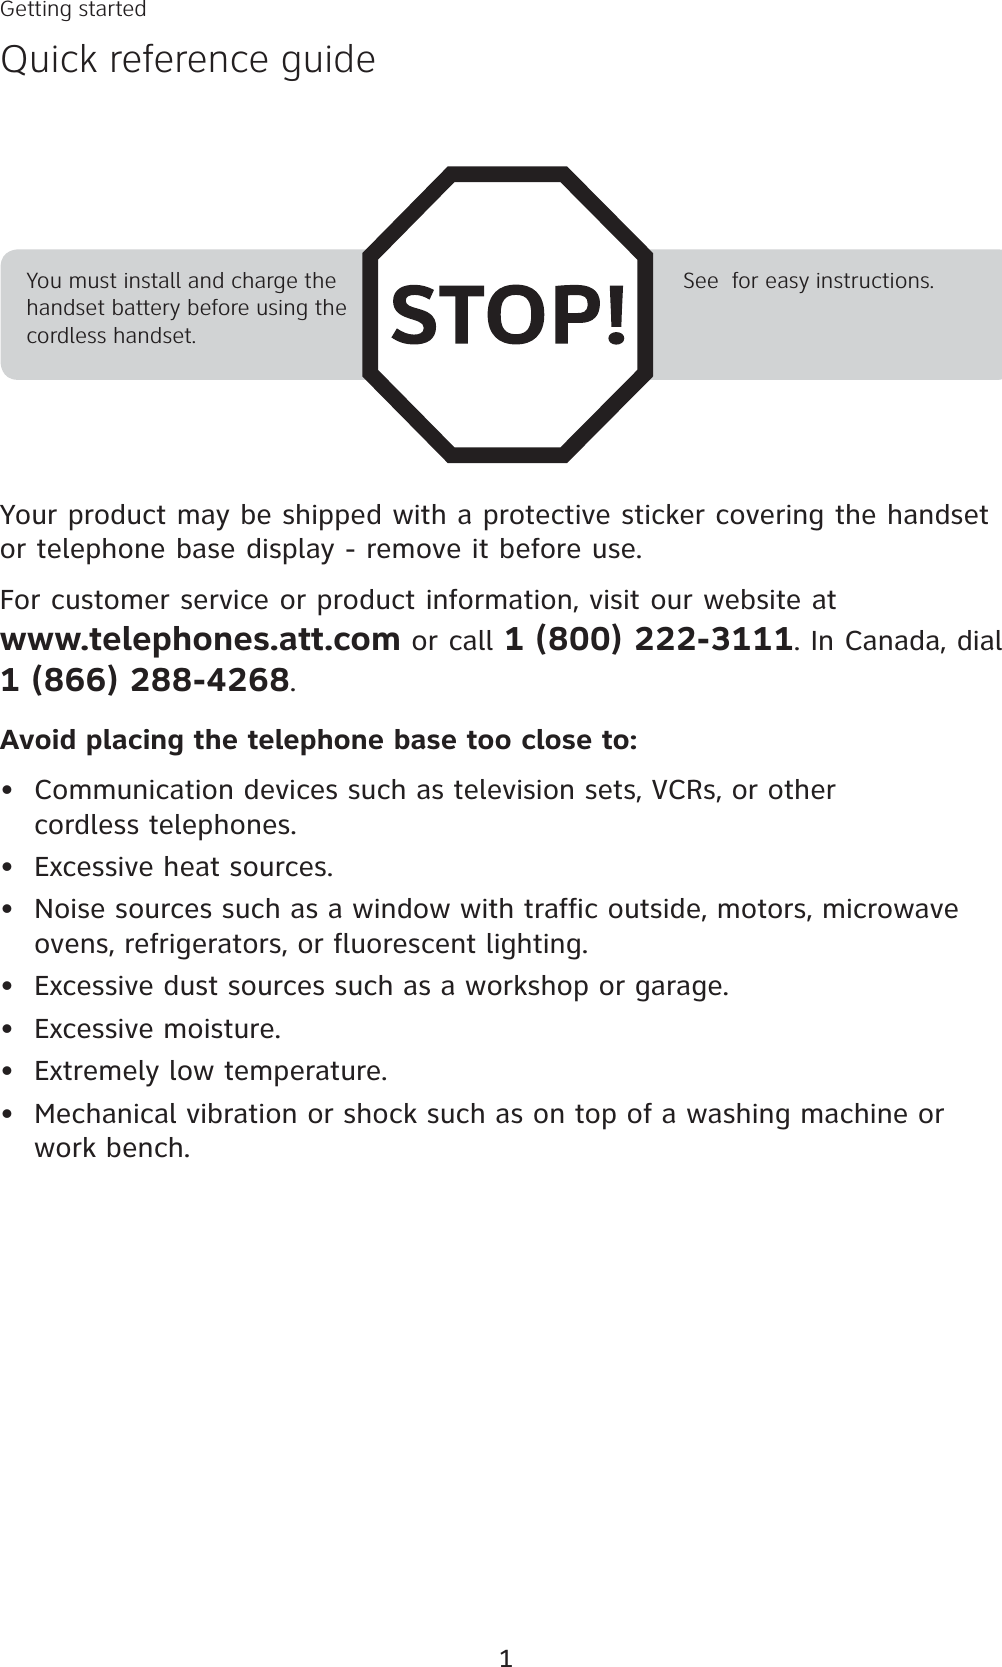 1Your product may be shipped with a protective sticker covering the handset or telephone base display - remove it before use.For customer service or product information, visit our website at www.telephones.att.com or call 1 (800) 222-3111. In Canada, dial 1 (866) 288-4268.Avoid placing the telephone base too close to:Communication devices such as television sets, VCRs, or other cordless telephones.Excessive heat sources.Noise sources such as a window with traffic outside, motors, microwave ovens, refrigerators, or fluorescent lighting.Excessive dust sources such as a workshop or garage.Excessive moisture.Extremely low temperature.Mechanical vibration or shock such as on top of a washing machine or work bench.•••••••You must install and charge the handset battery before using the cordless handset.See  for easy instructions.Getting startedQuick reference guide